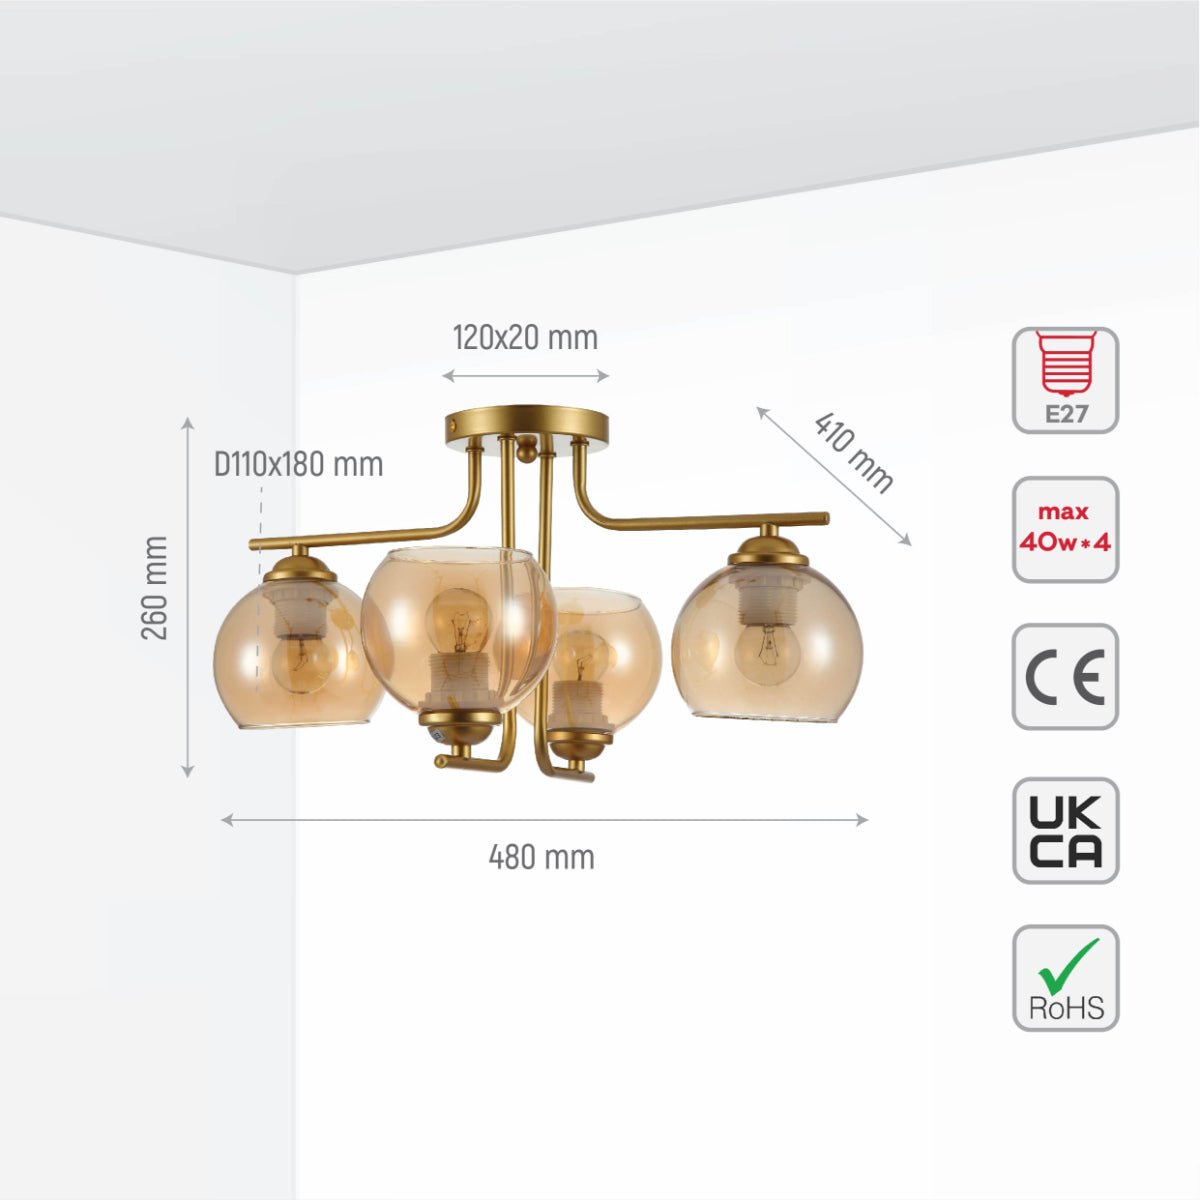 Size and specs of Gold L shape Metal Amber Dome Glass Ceiling Light with E27 Fittings | TEKLED 159-17628